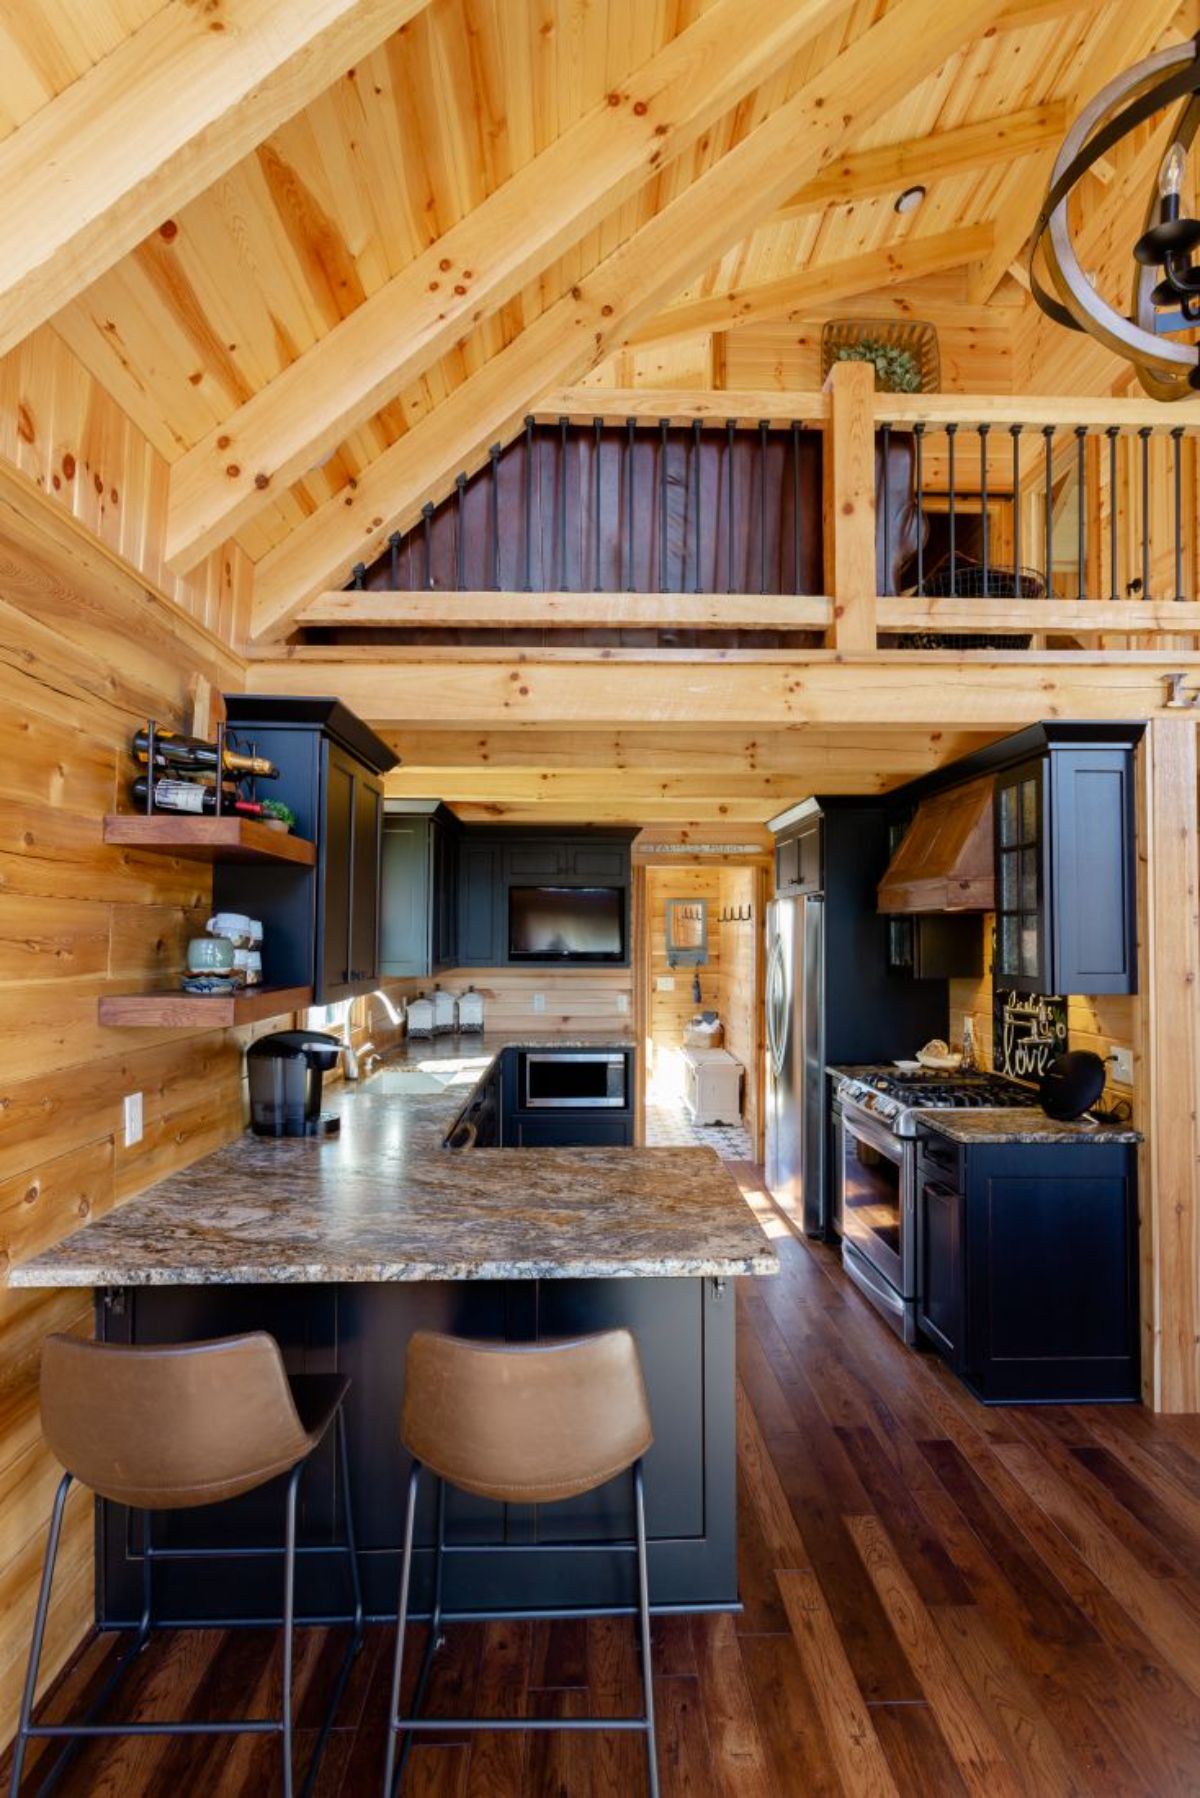 black cabinets and granite counters in kitchen of log cabin underneath loft space